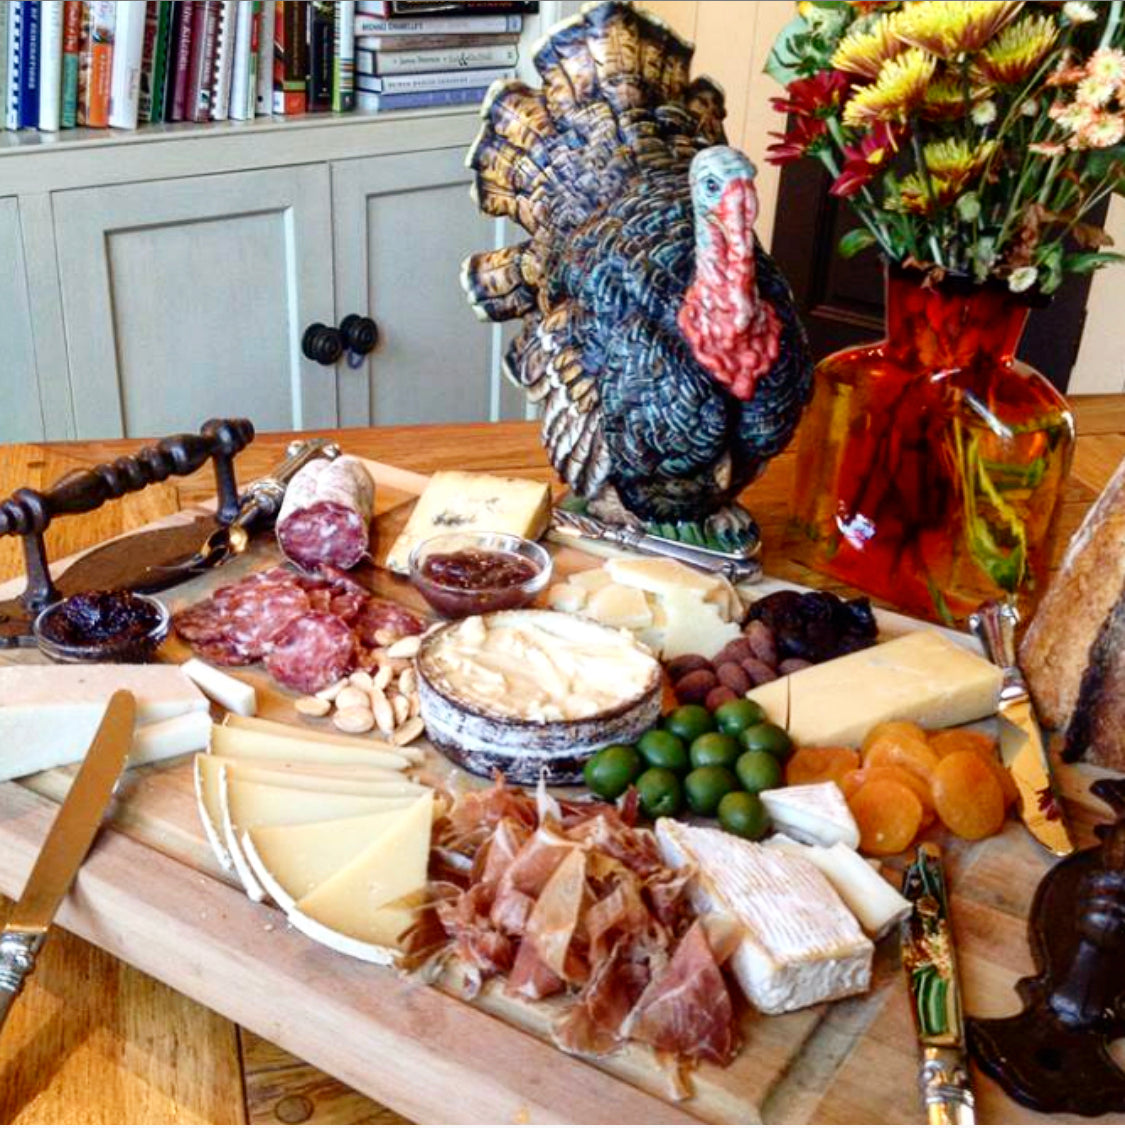 One cheese board with wedges of cheese, sliced meat and pairings with a ceramic turkey decoration for thanksgiving.